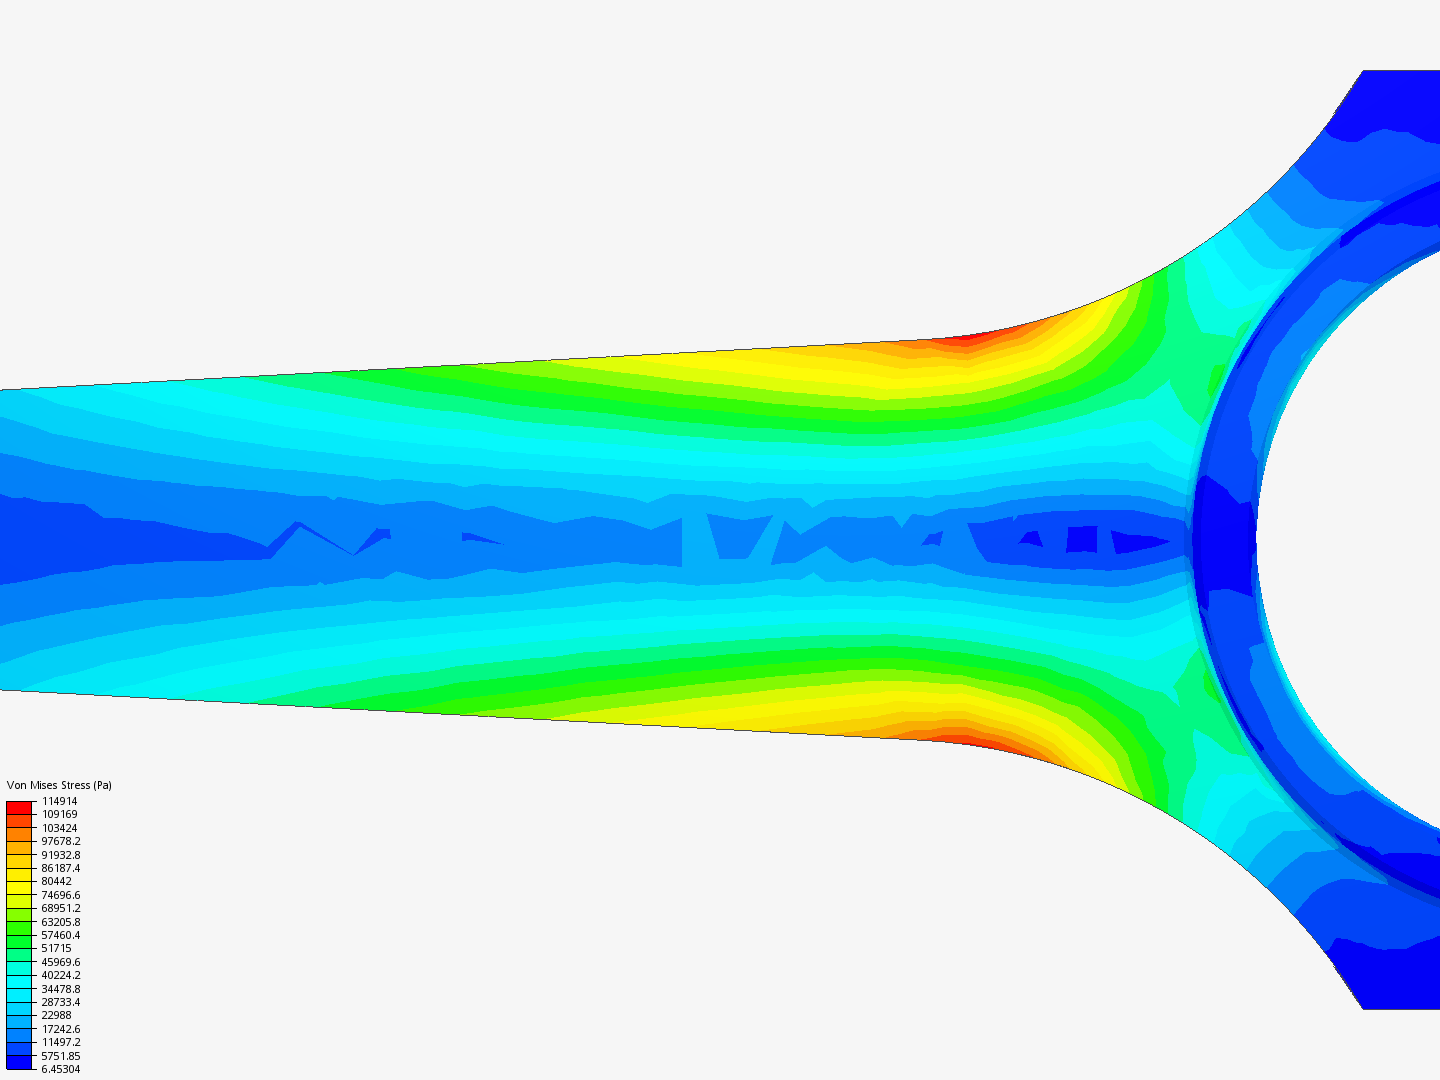 Tutorial 1: Connecting rod stress analysis by molonov | SimScale